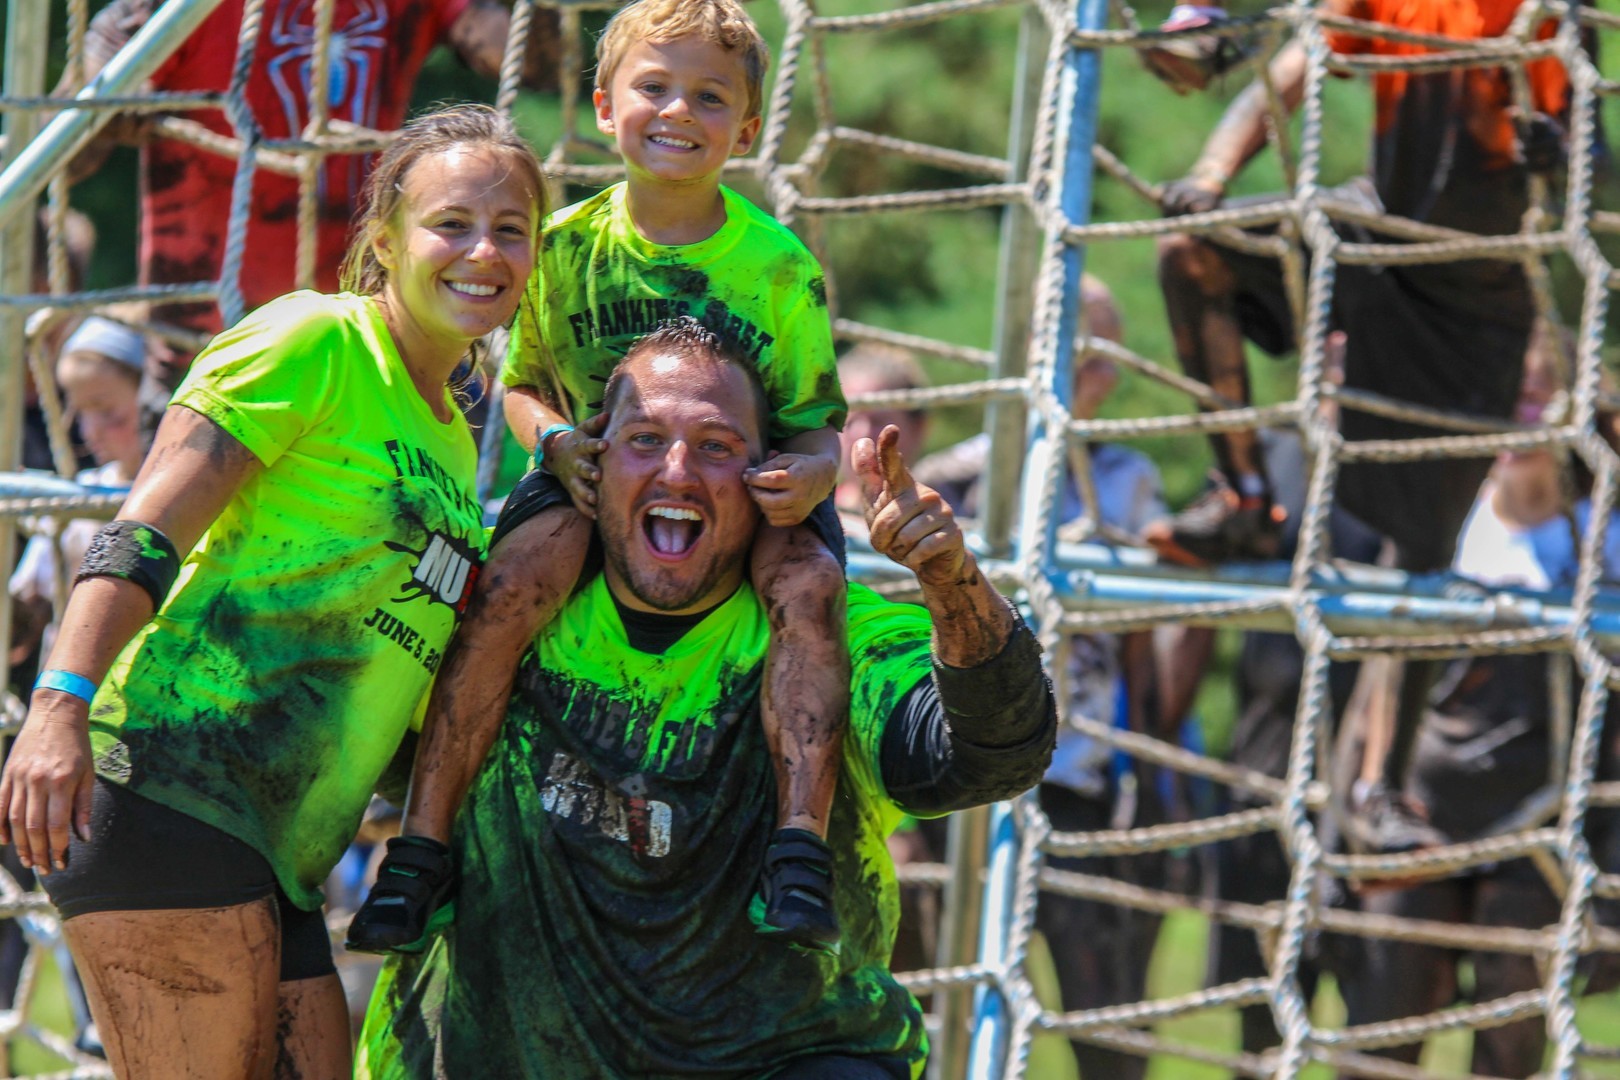 Your First Mud Run at Fair Lawn, Fair Lawn, New Jersey, United States